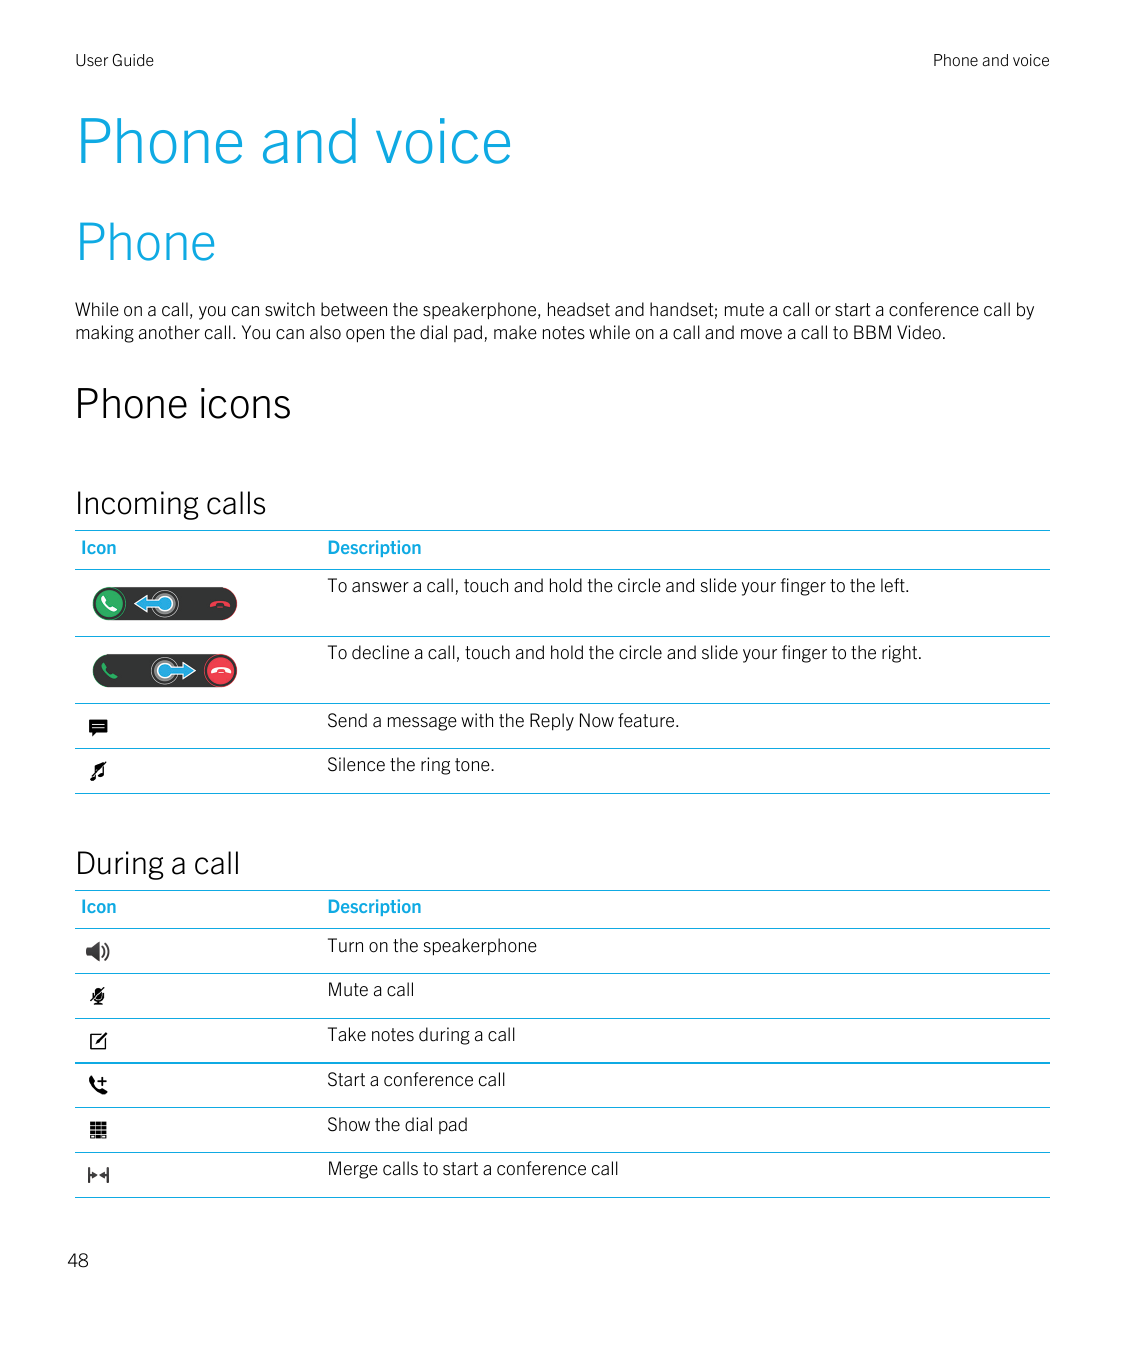 User GuidePhone and voicePhone and voicePhoneWhile on a call, you can switch between the speakerphone, headset and handset; mute